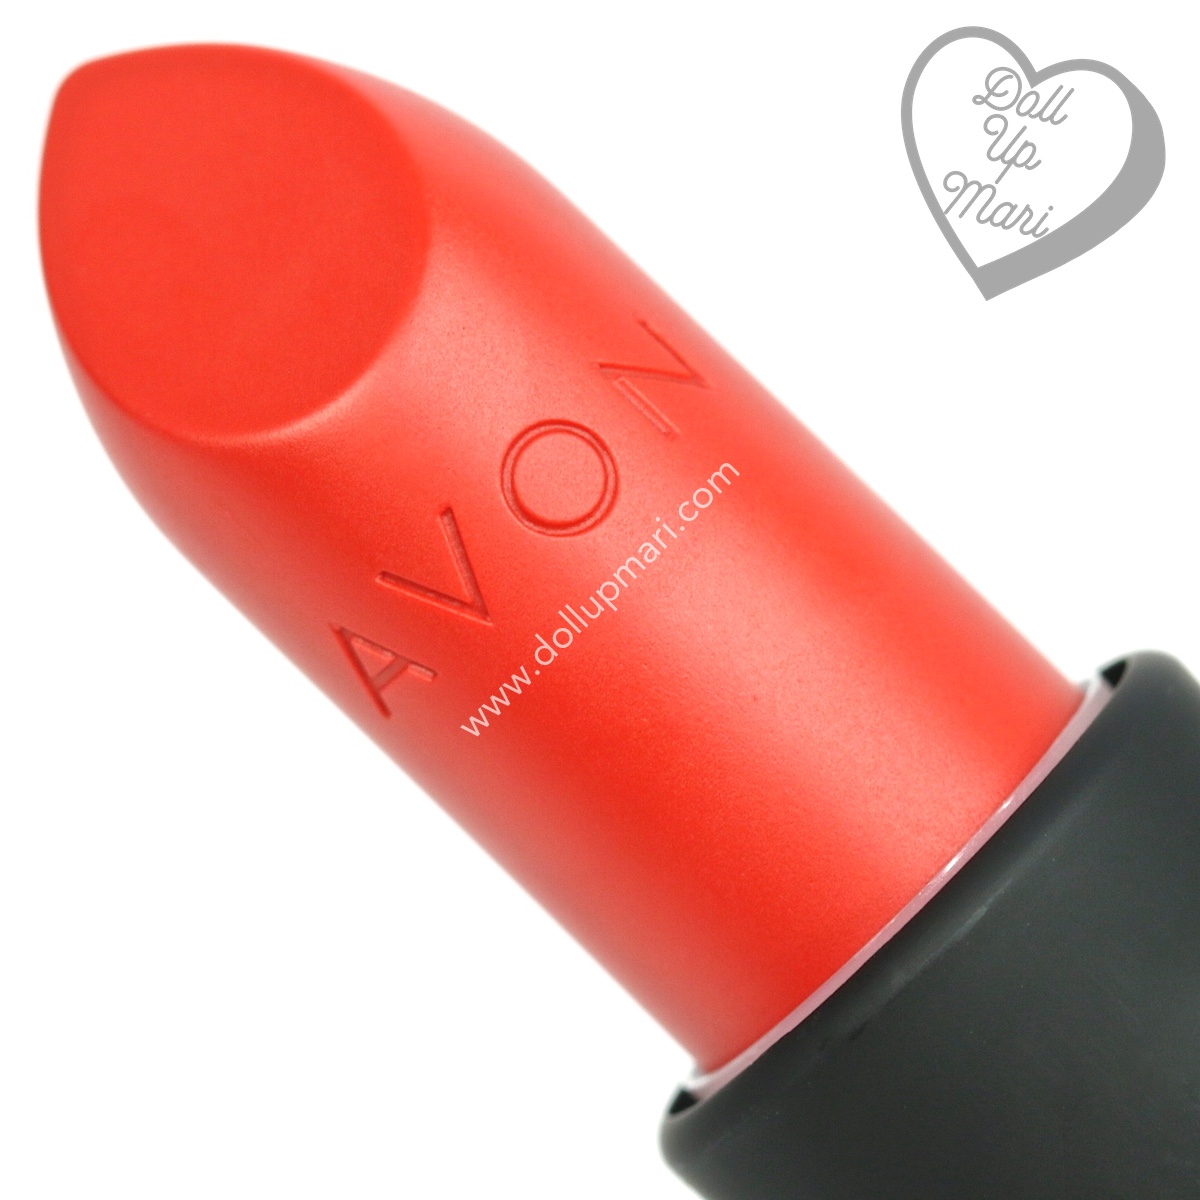 zoom in of Coral Fever shade of AVON Perfectly Matte Lipstick